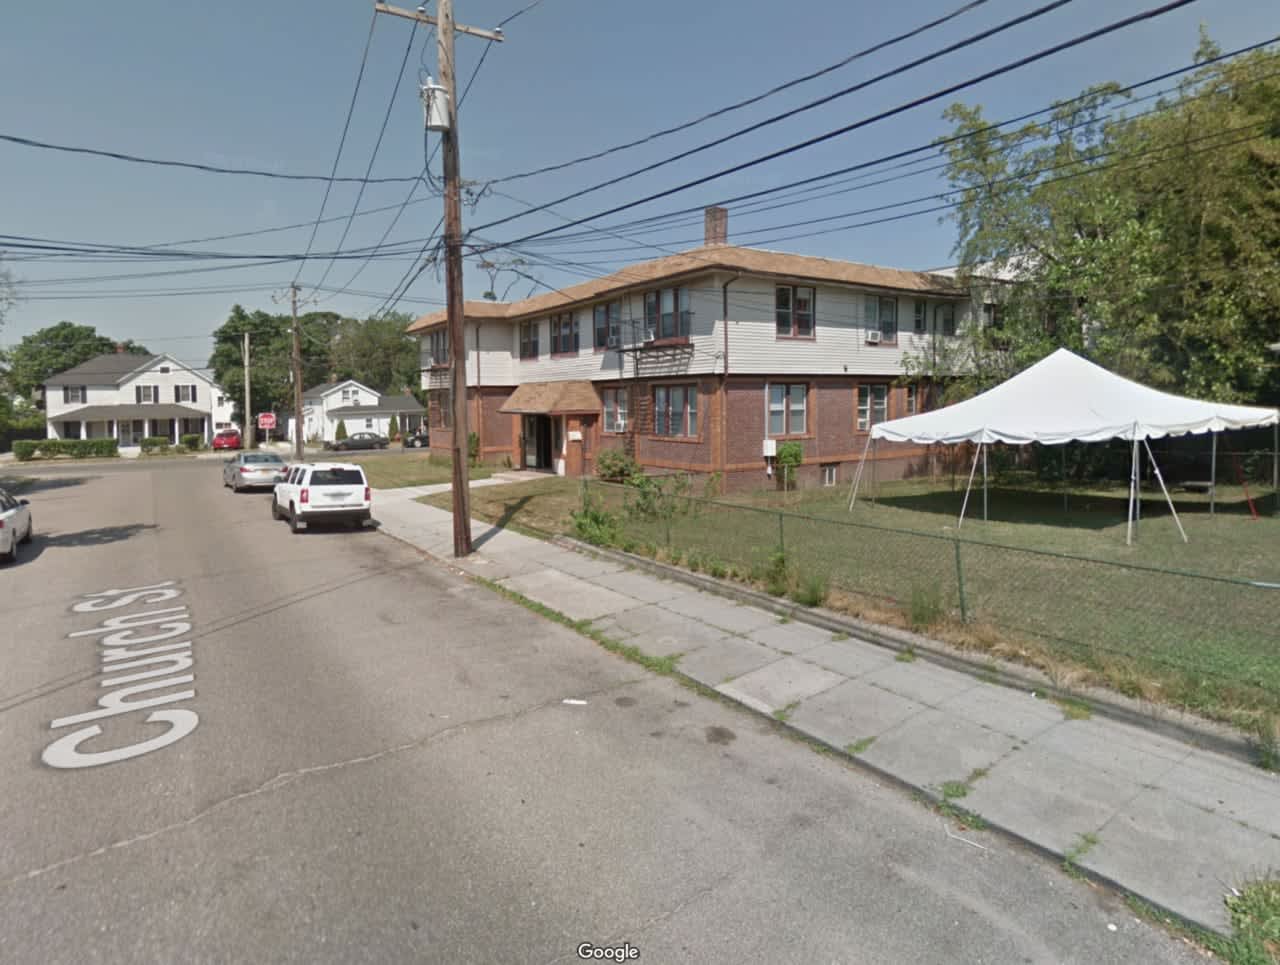 An 82-year-old man fell down an abandoned cesspool in Patchogue.